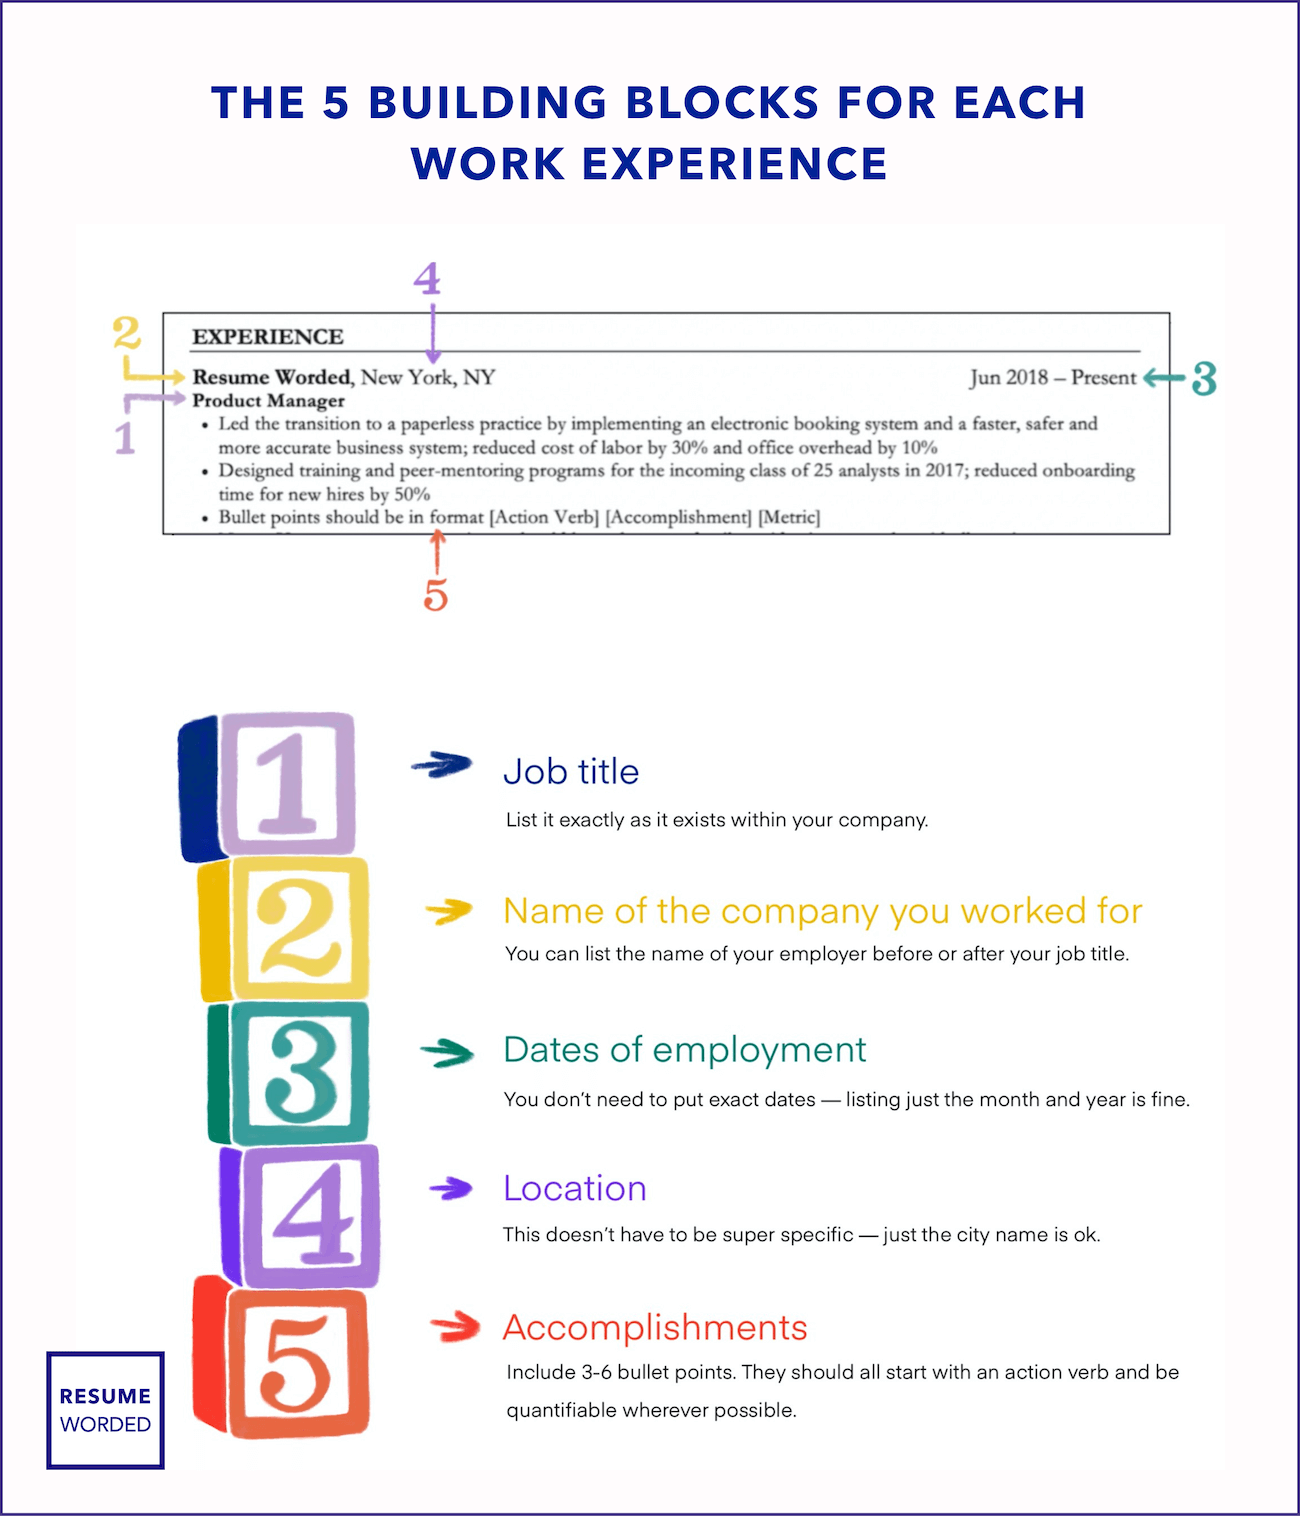 The five key components of a work experience section